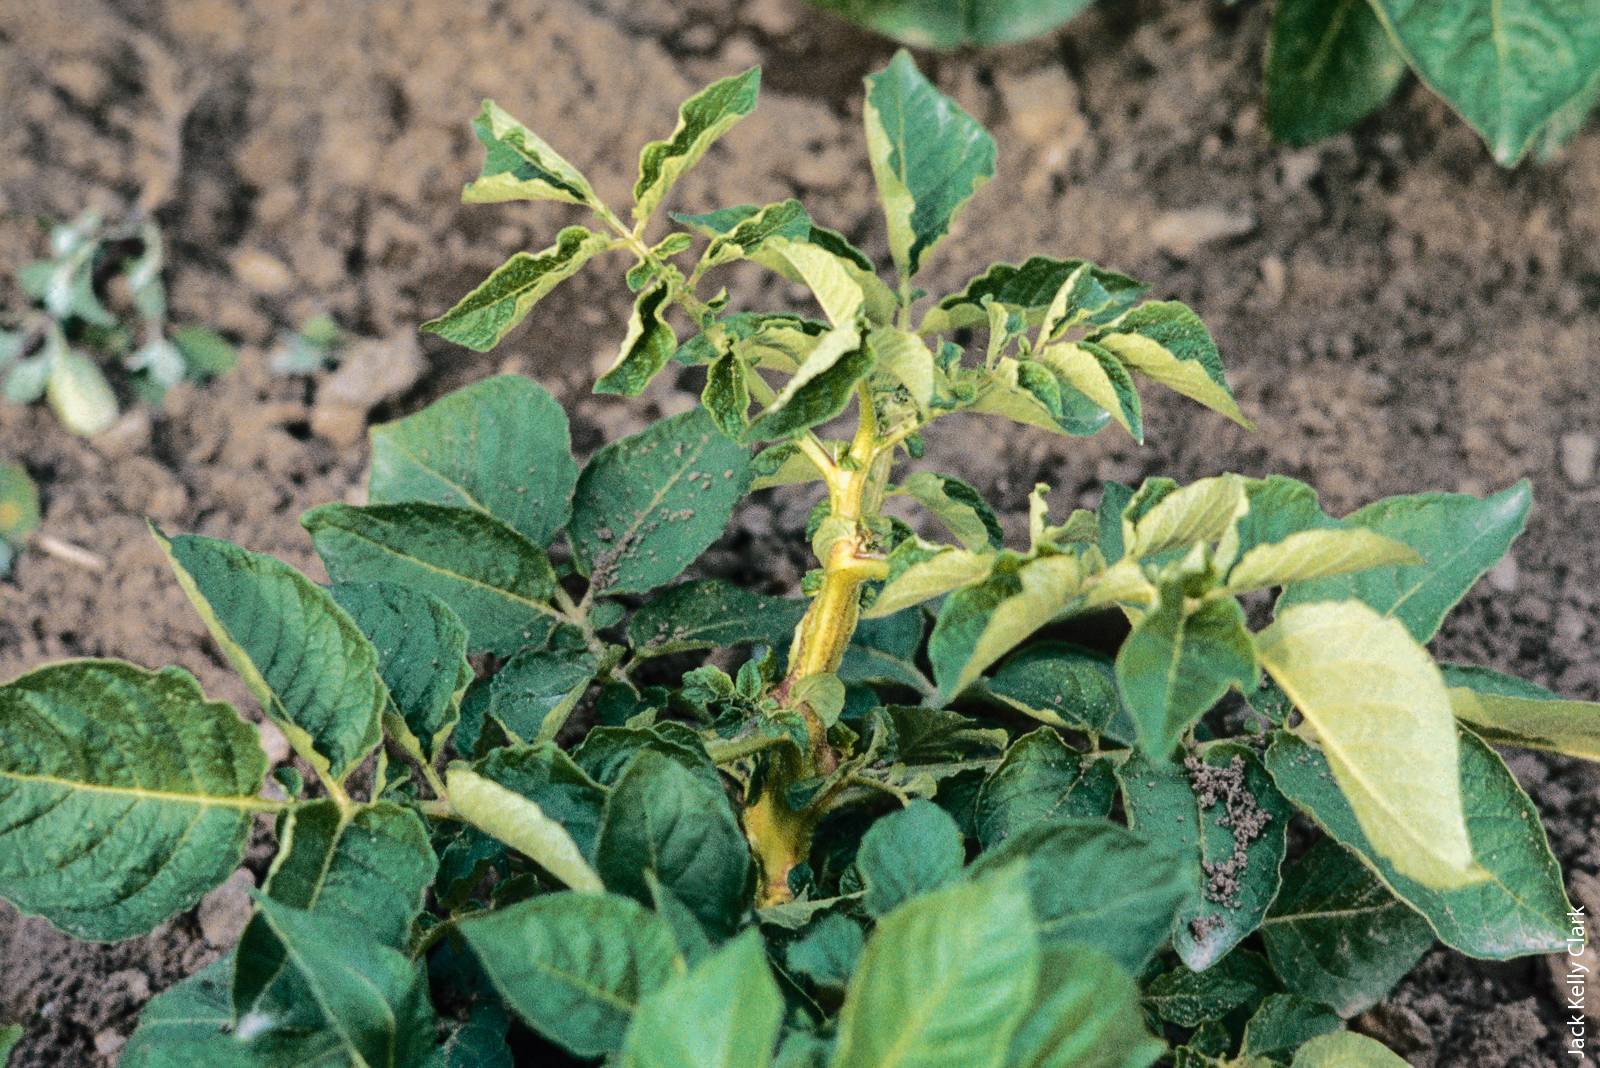 Feeding by potato psyllid can stunt the growth of potato leaves and cause leaflets to roll upward and turn yellow.